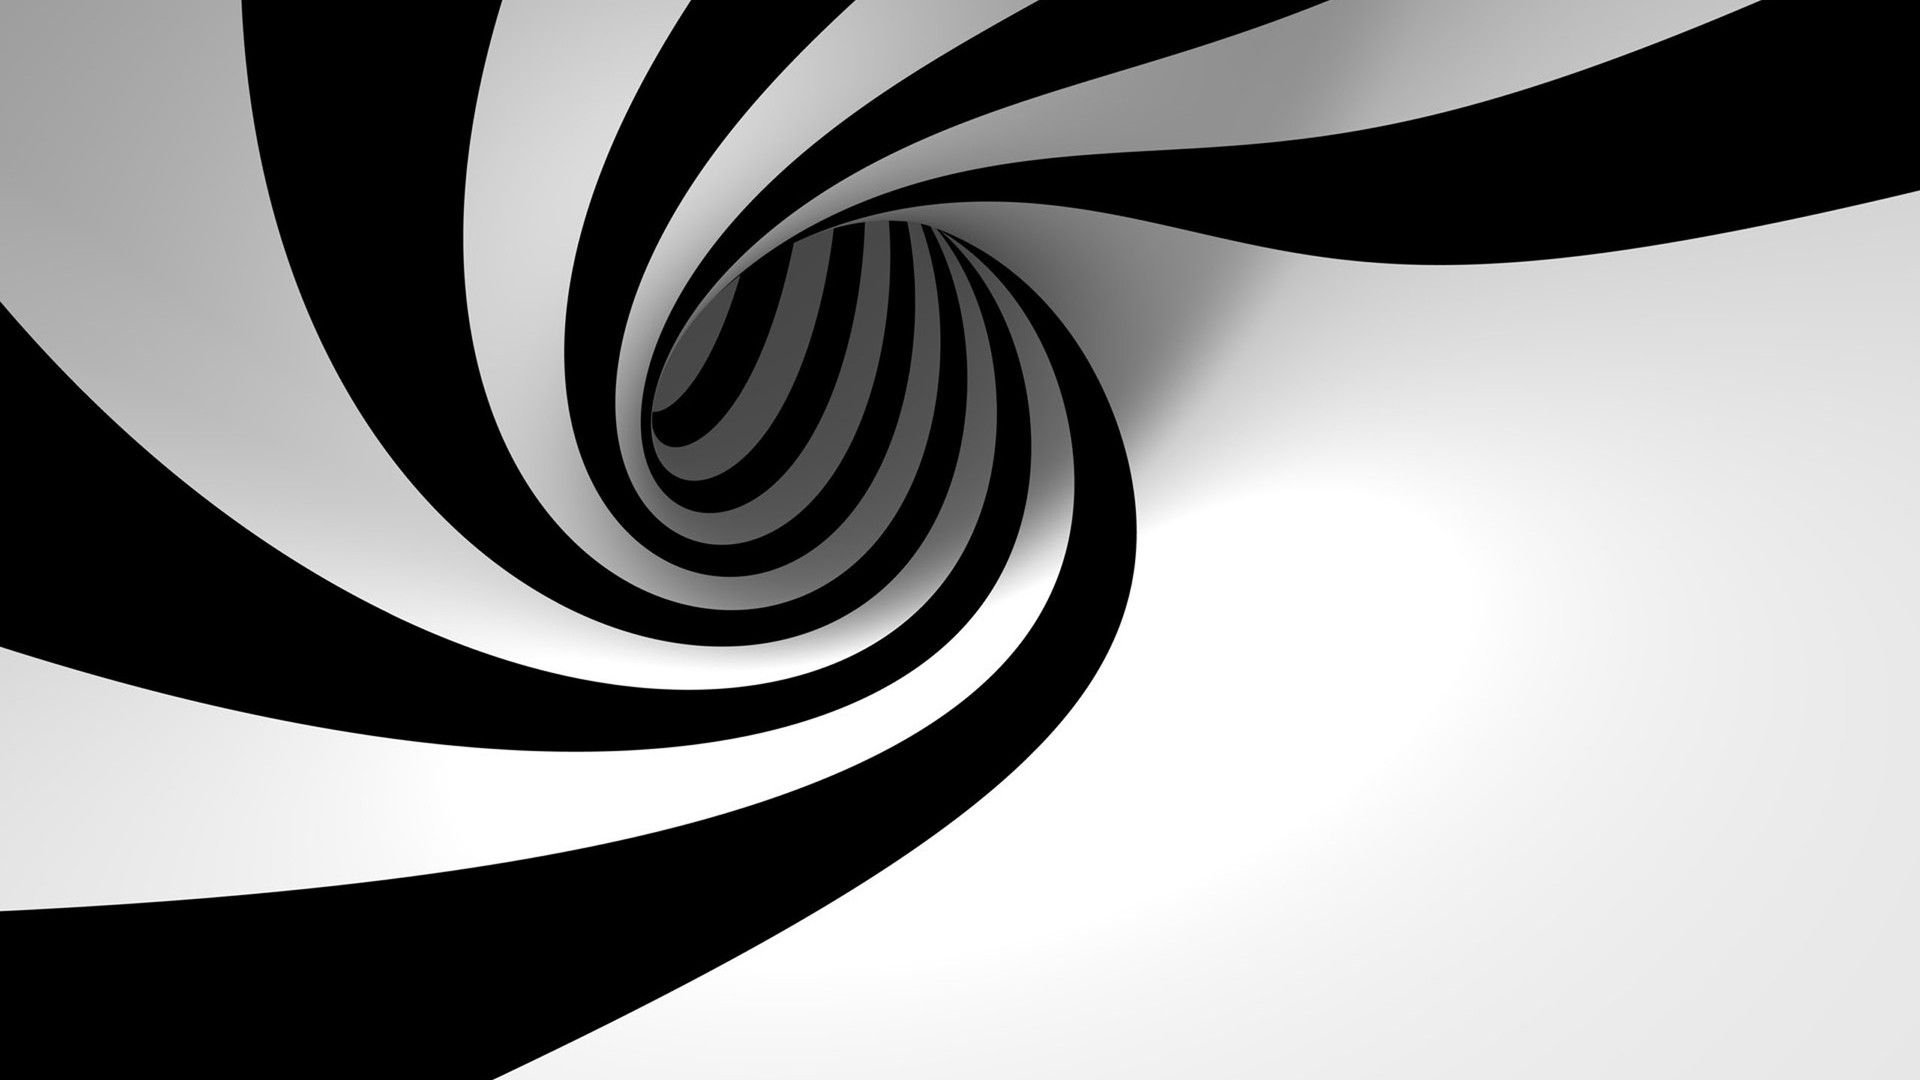 Black and white whirl abstract wallpaper 1920x1080 147